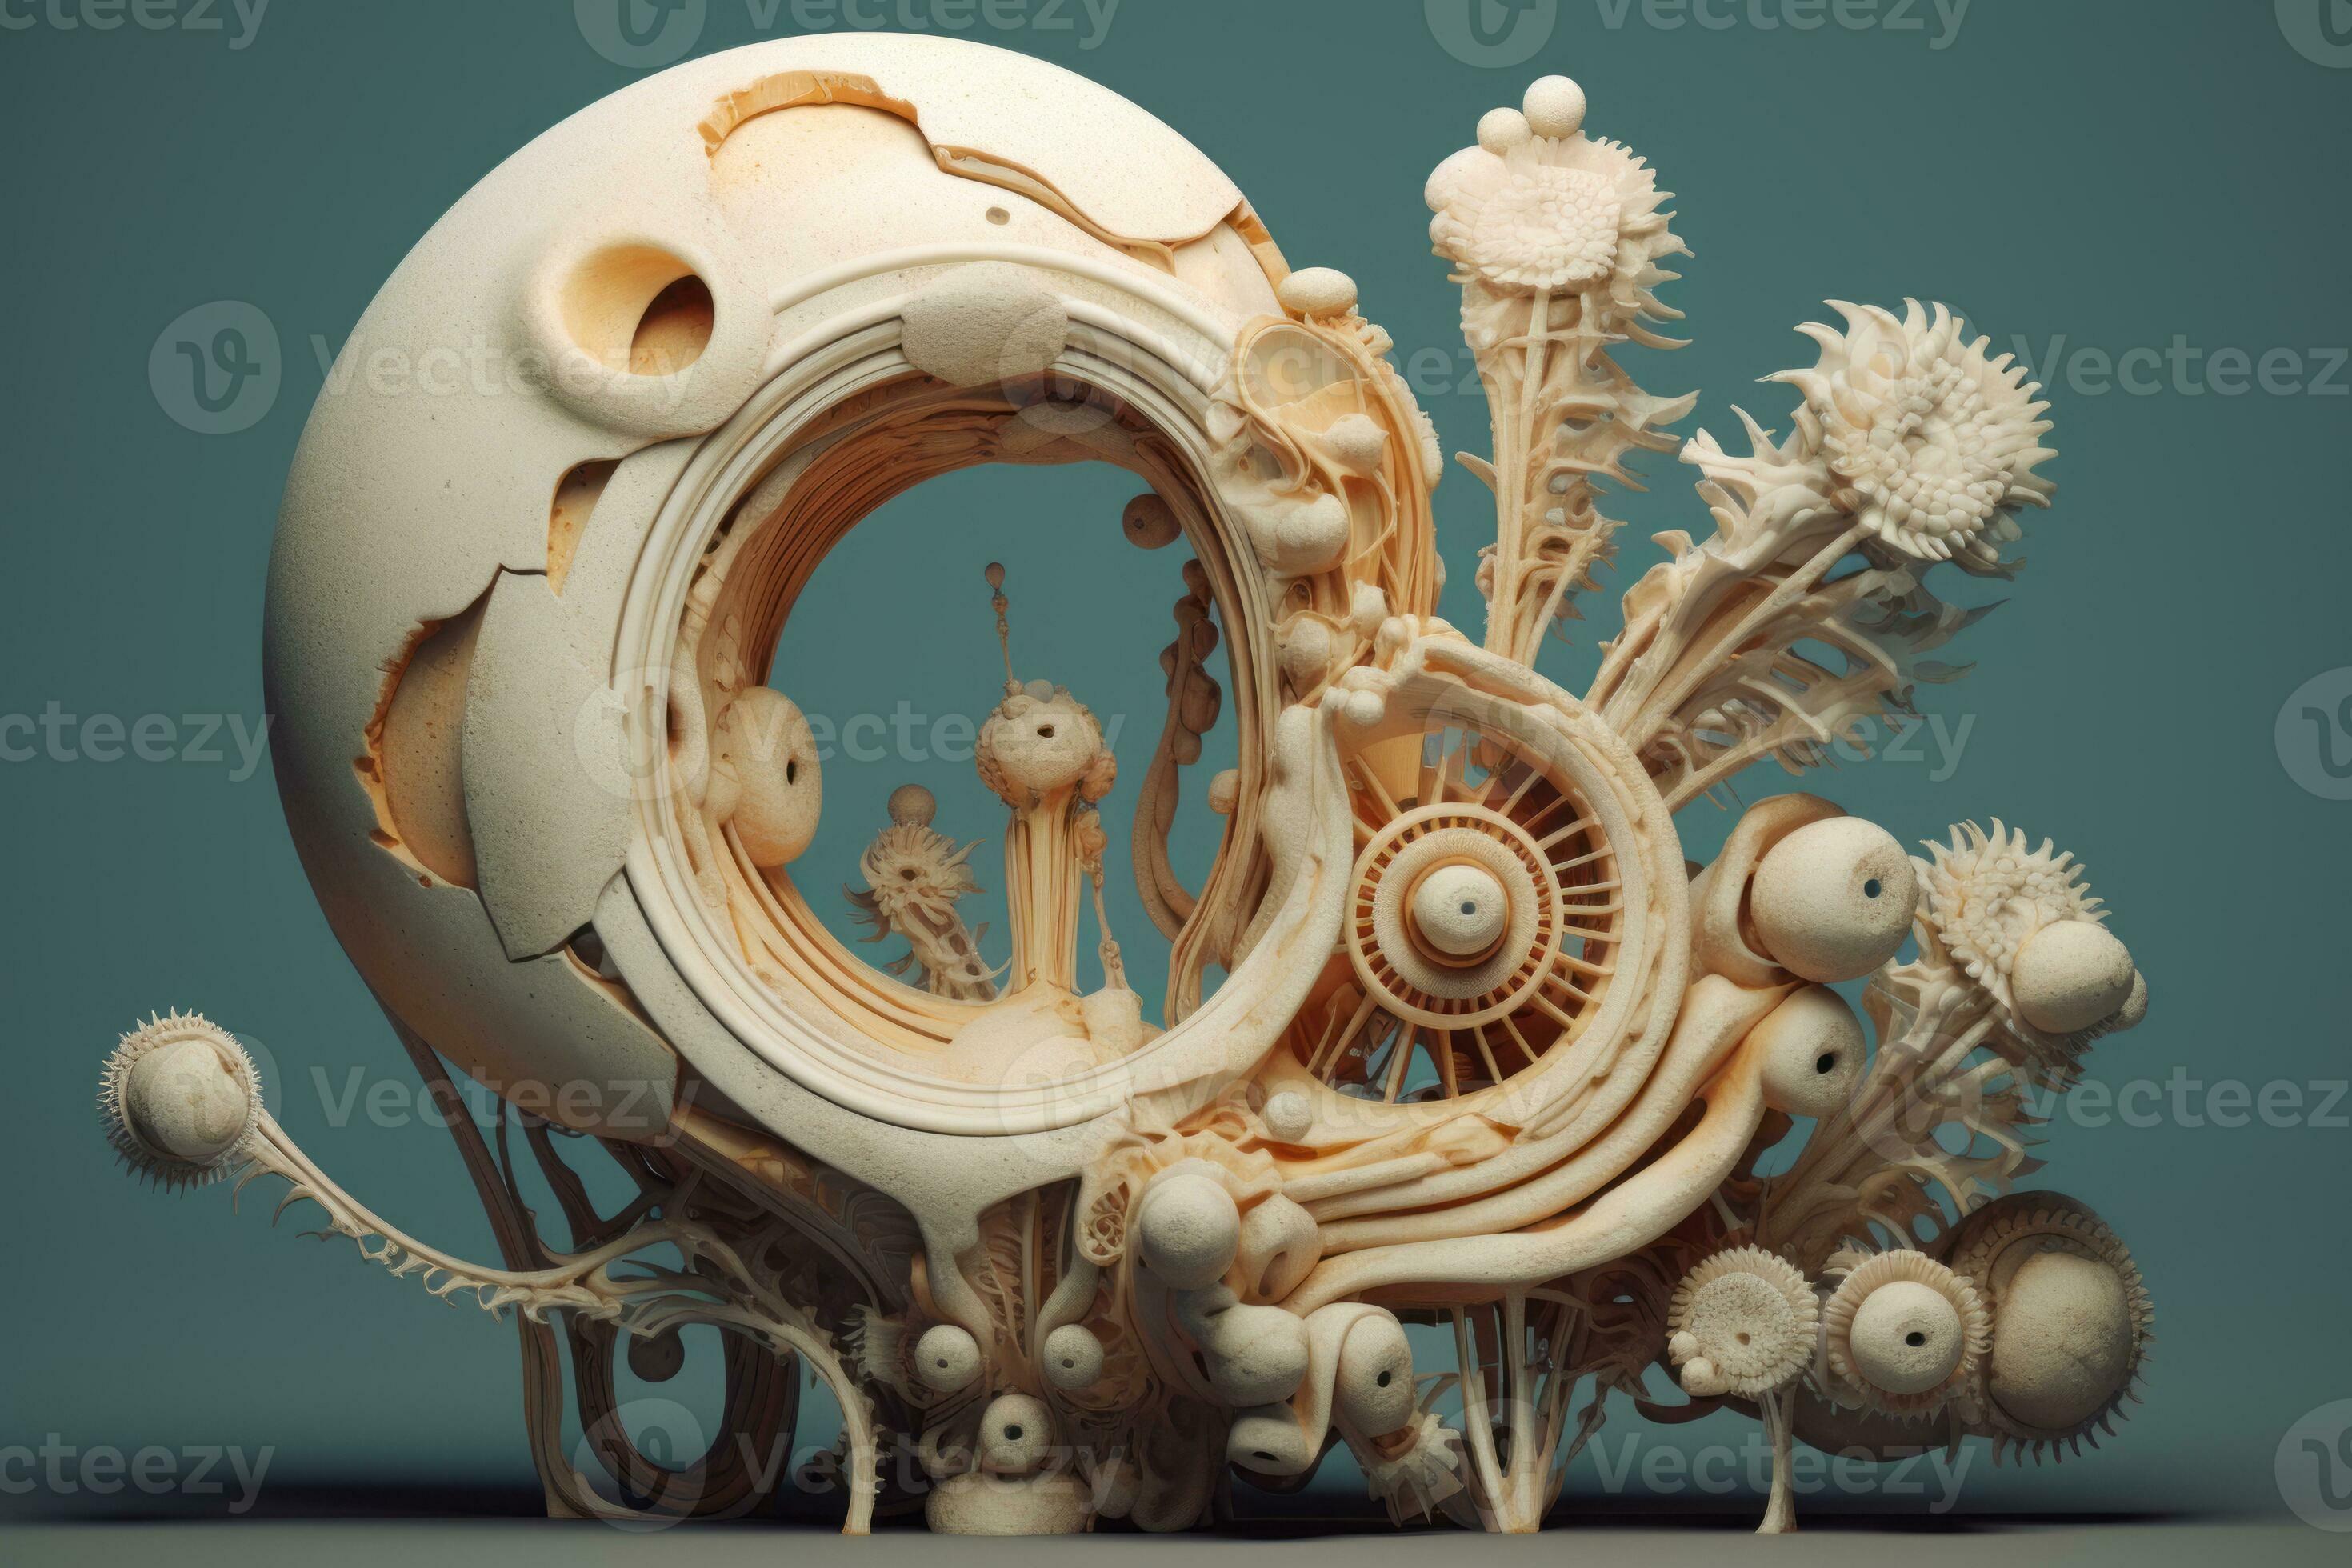 3D Artist Creates Blooming, Generative Sculptures With NVIDIA RTX